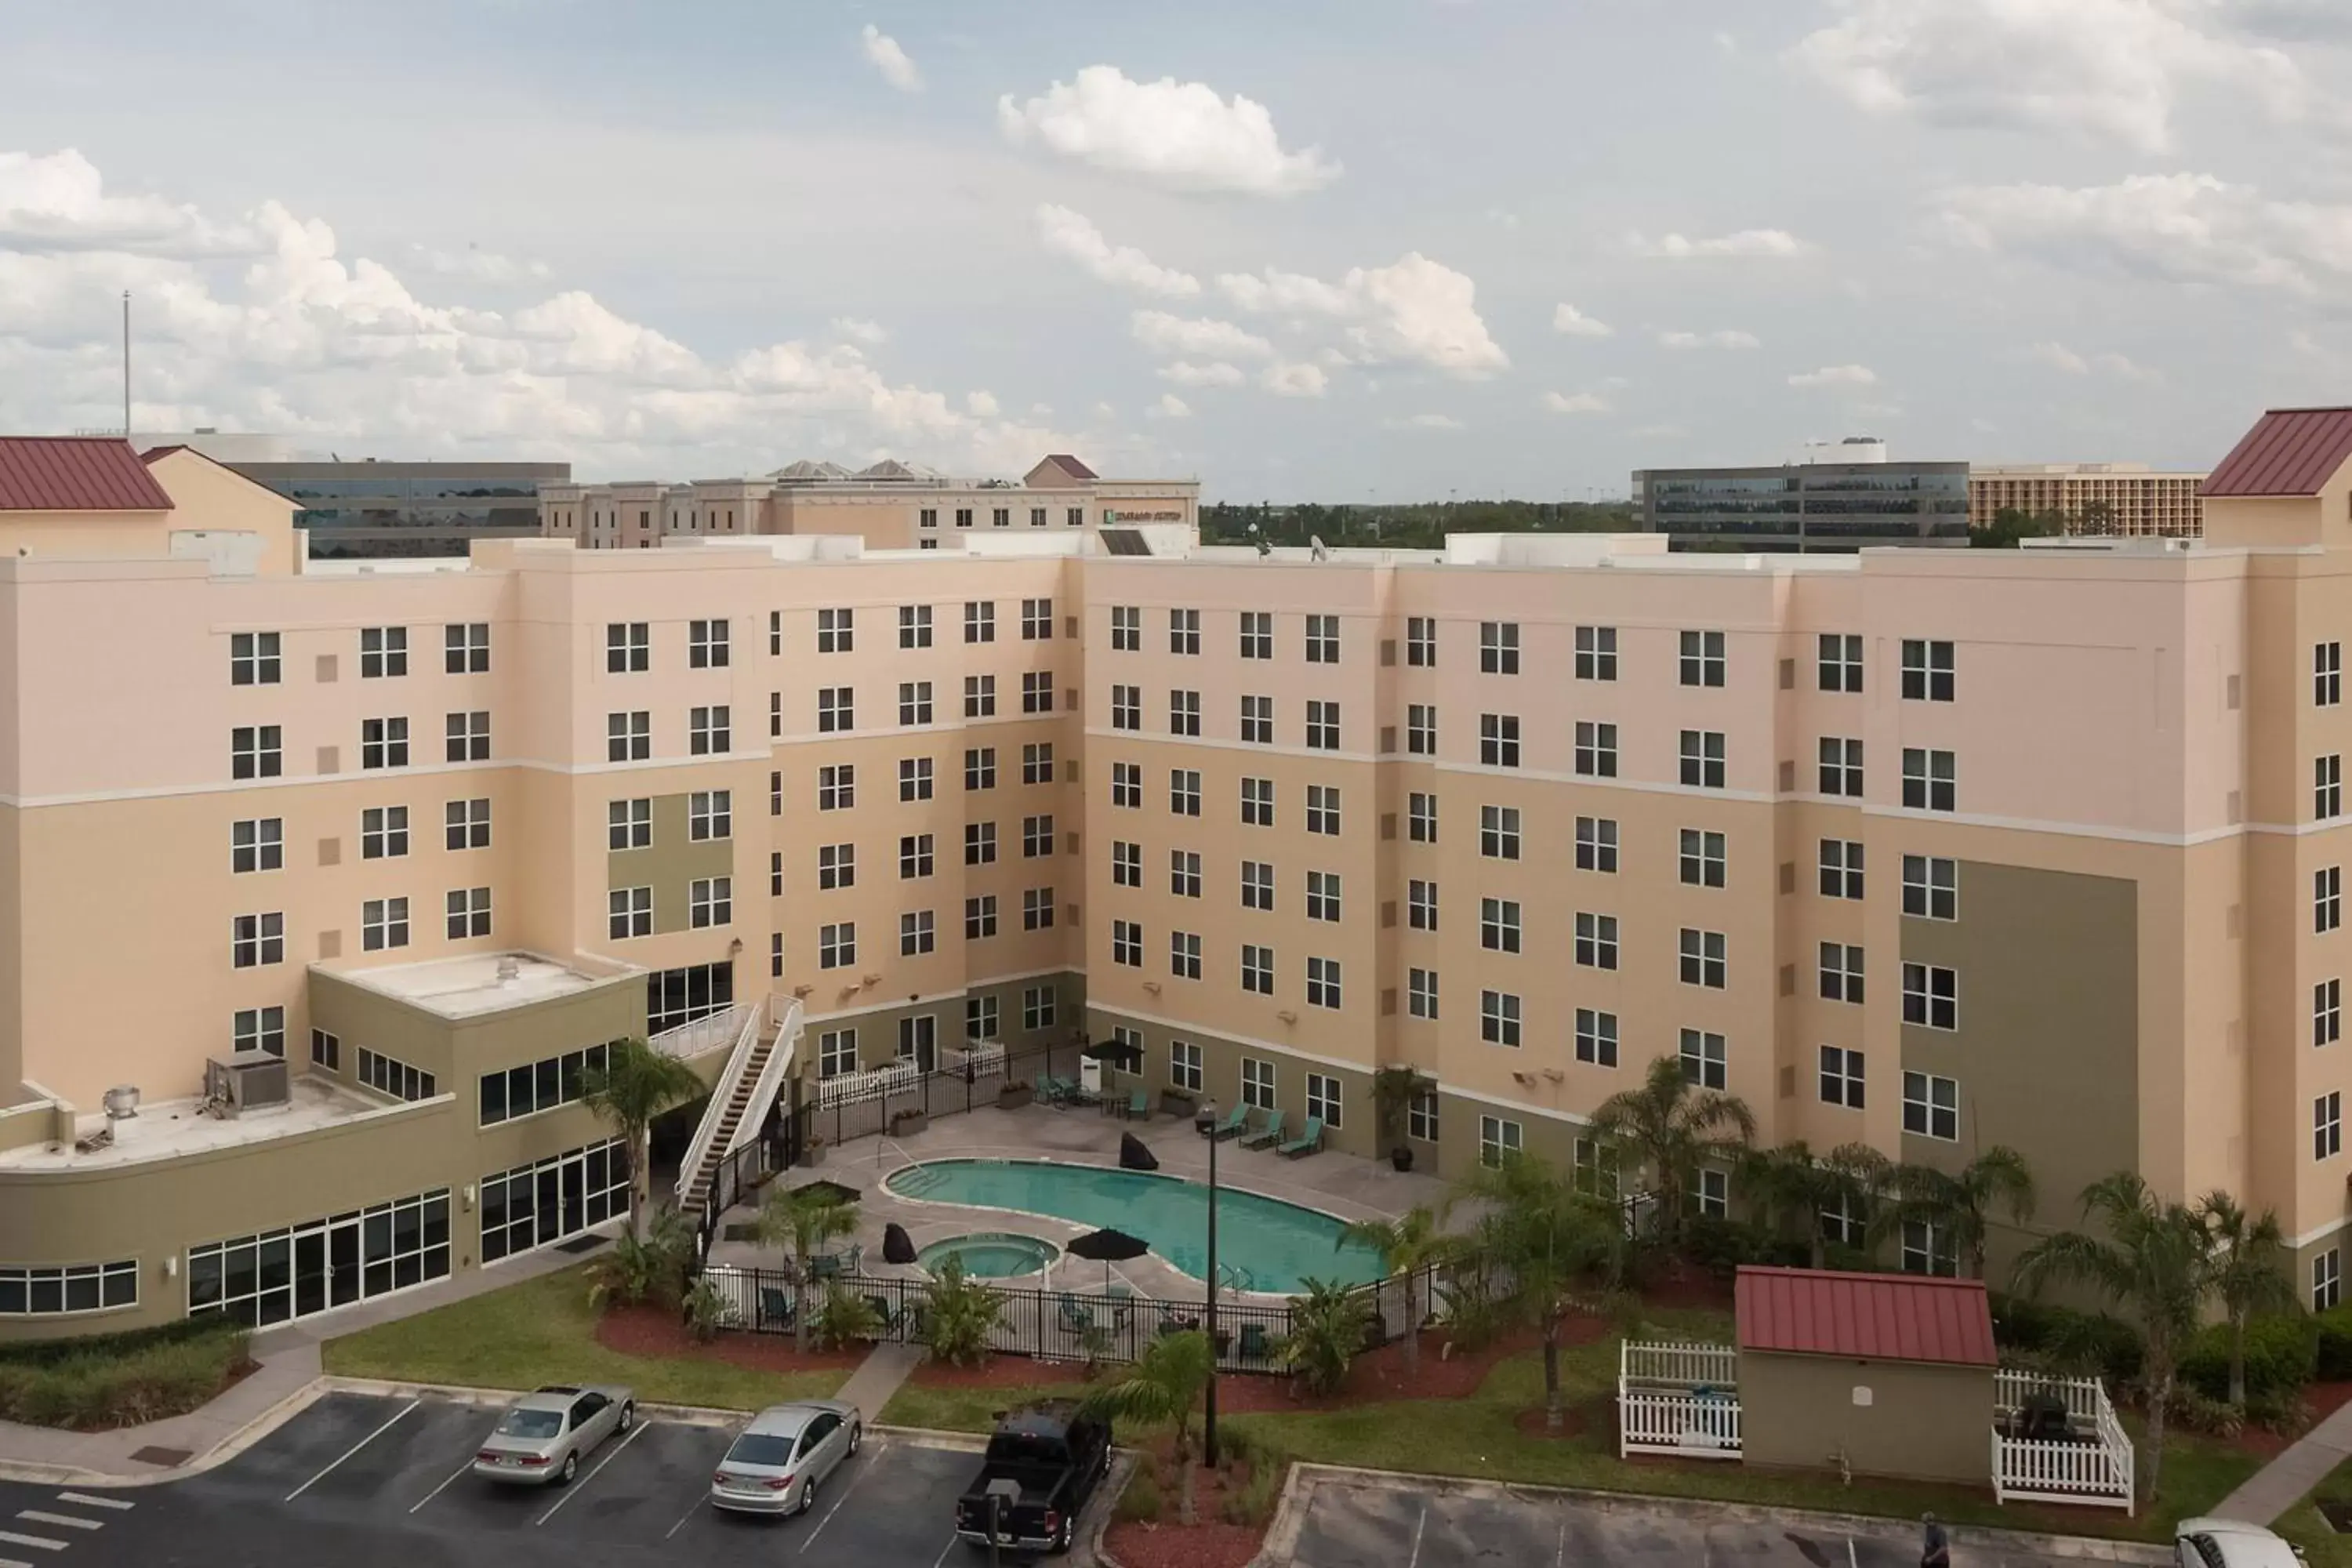 Property building in Residence Inn Orlando Airport